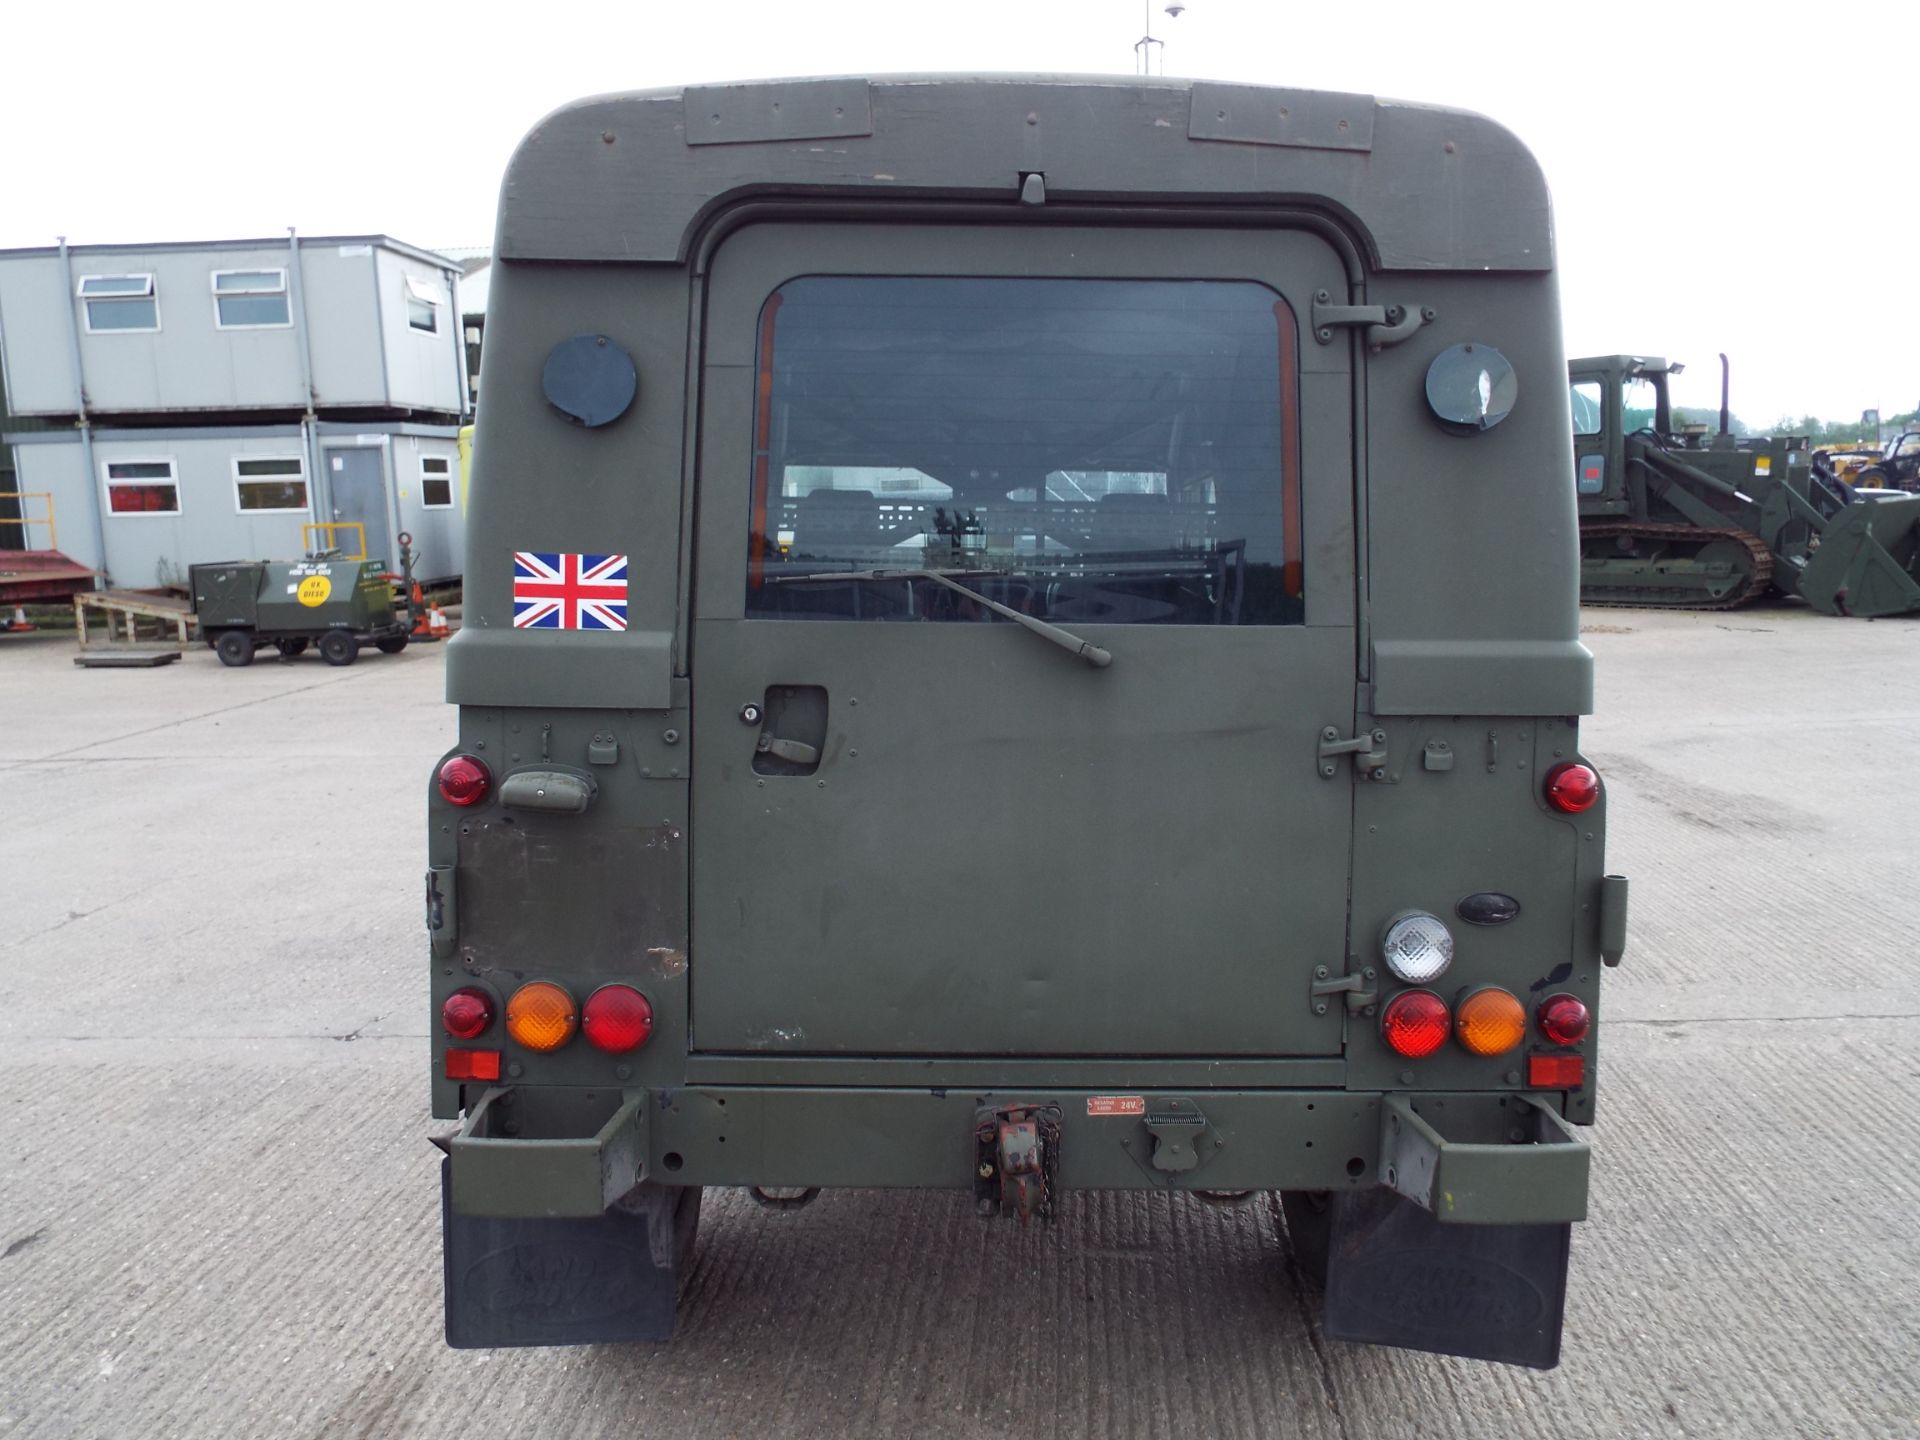 Royal Marines a Very Rare Winter/Water Land Rover Wolf 110 Hard Top - Image 4 of 27